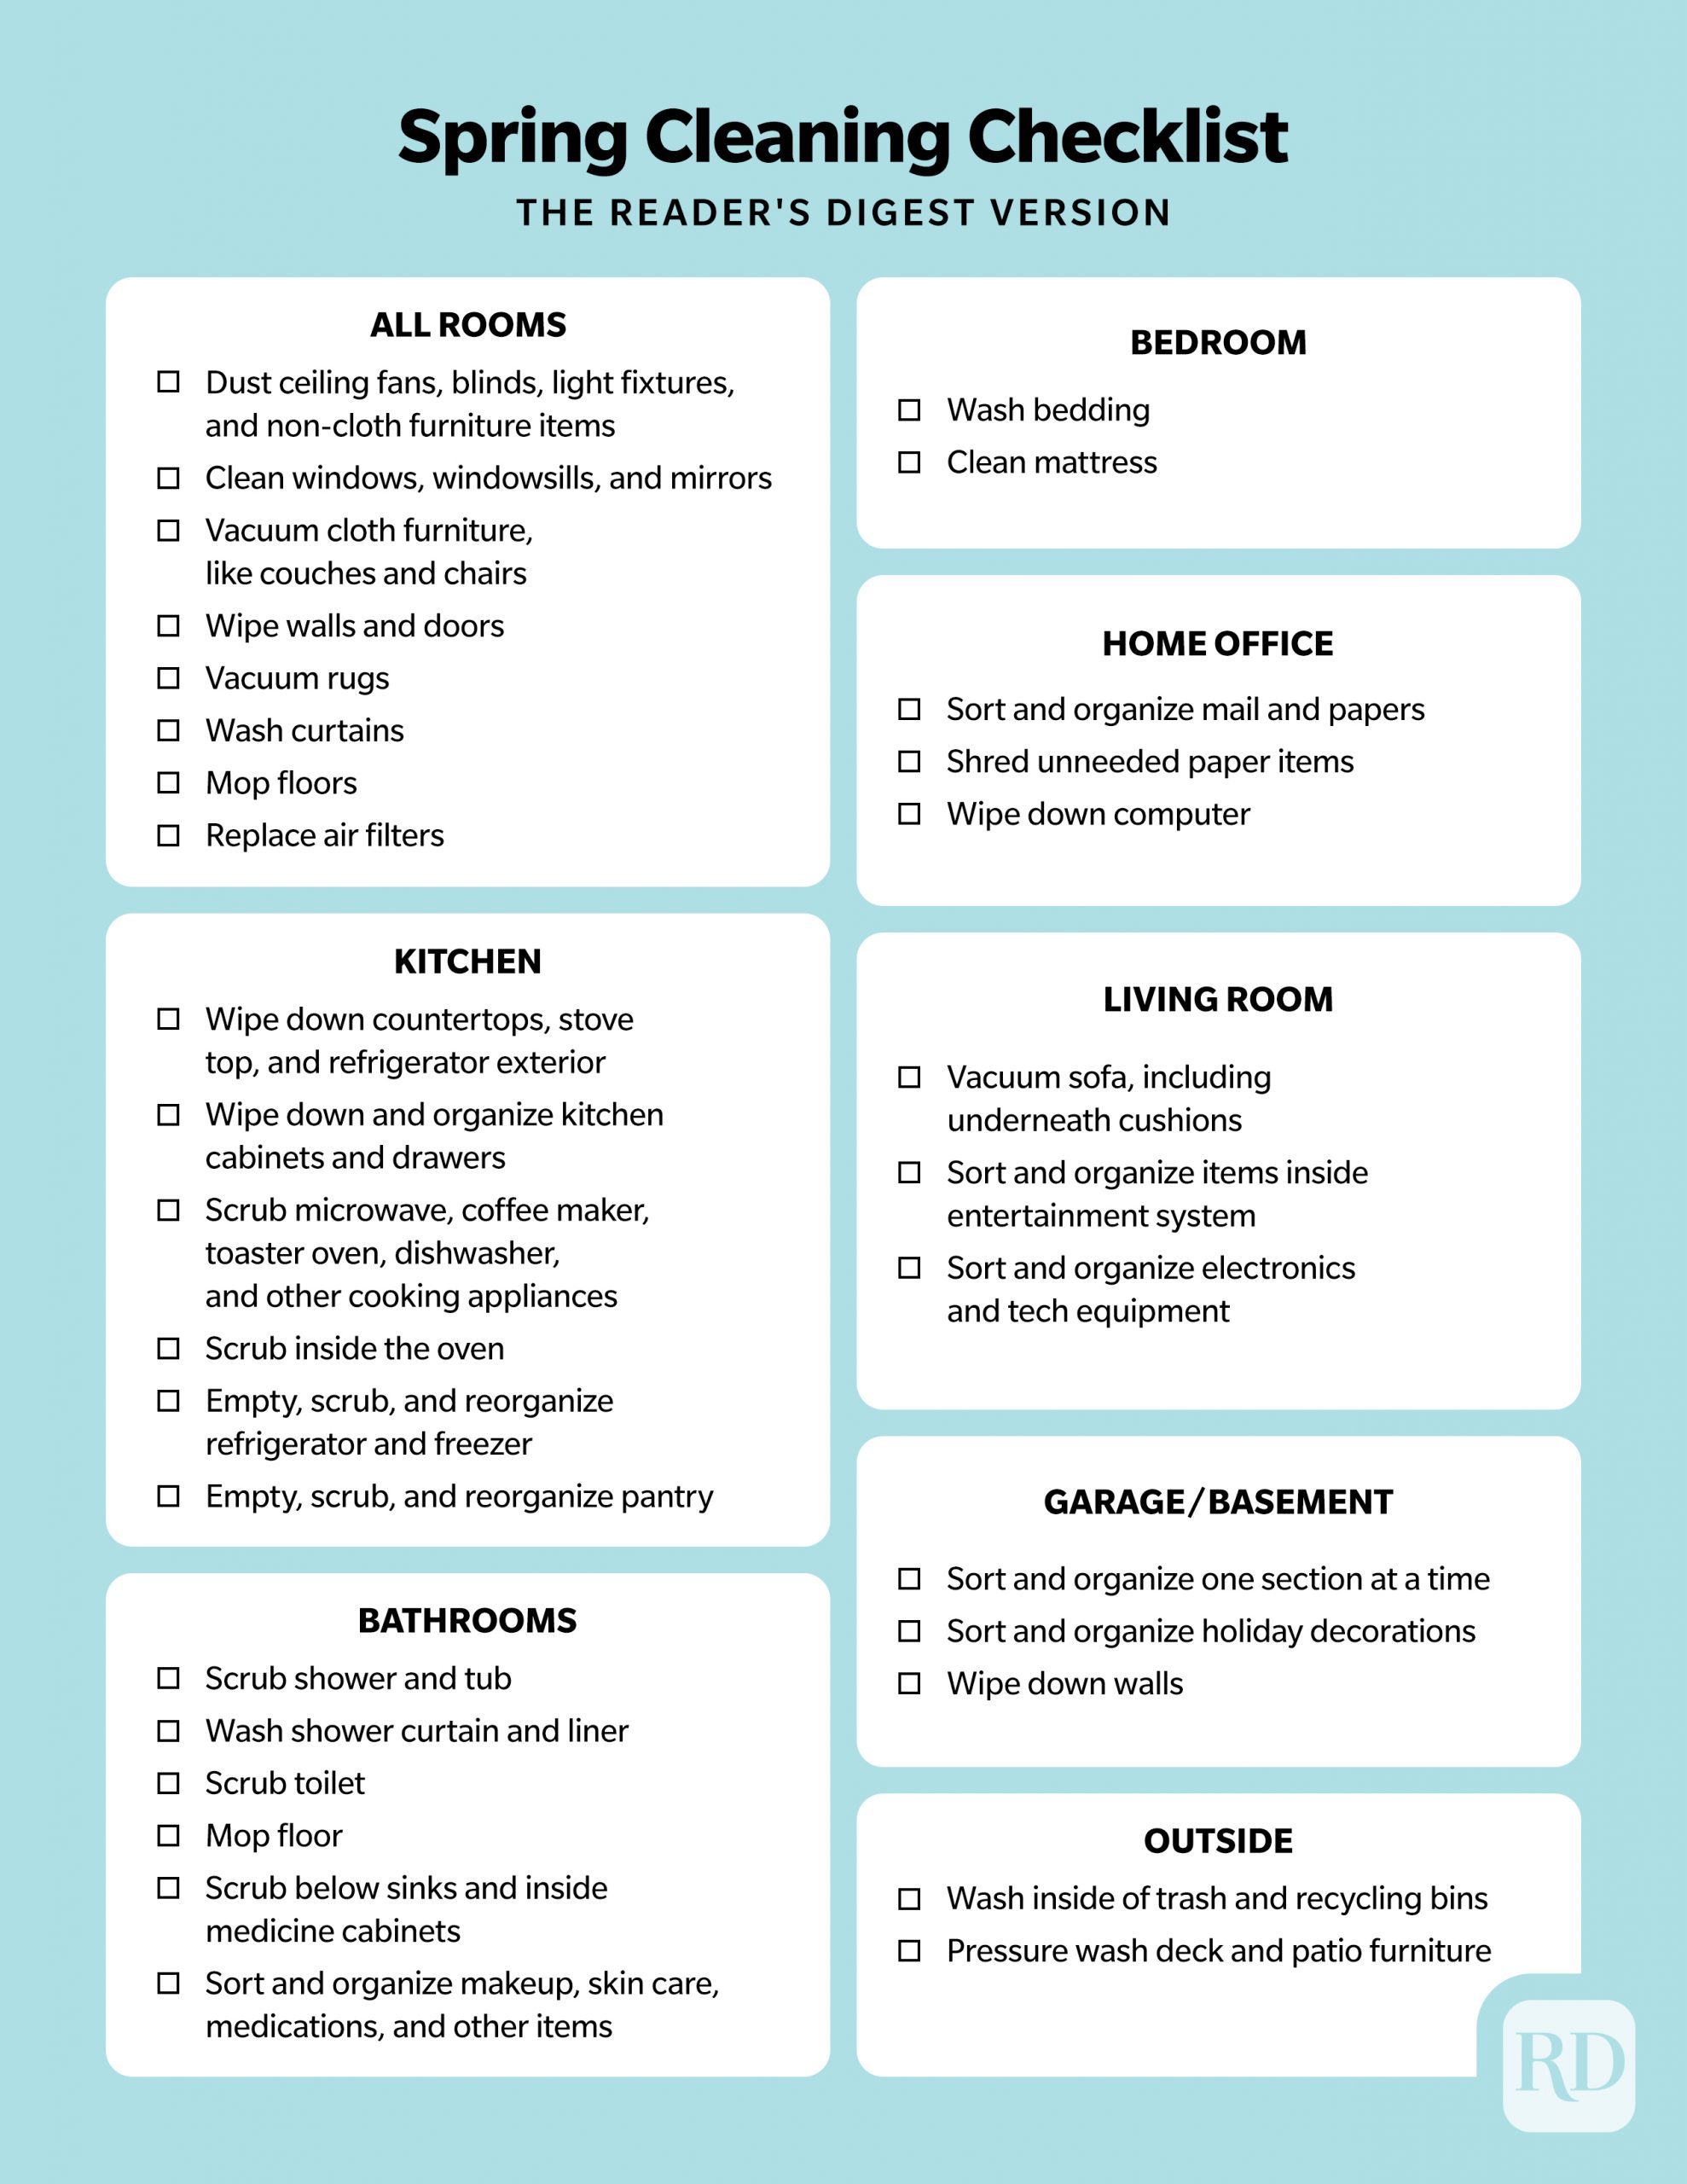 https://www.rd.com/wp-content/uploads/2020/04/RD-Spring-Cleaning-Checklist-Infographic-scaled.jpg